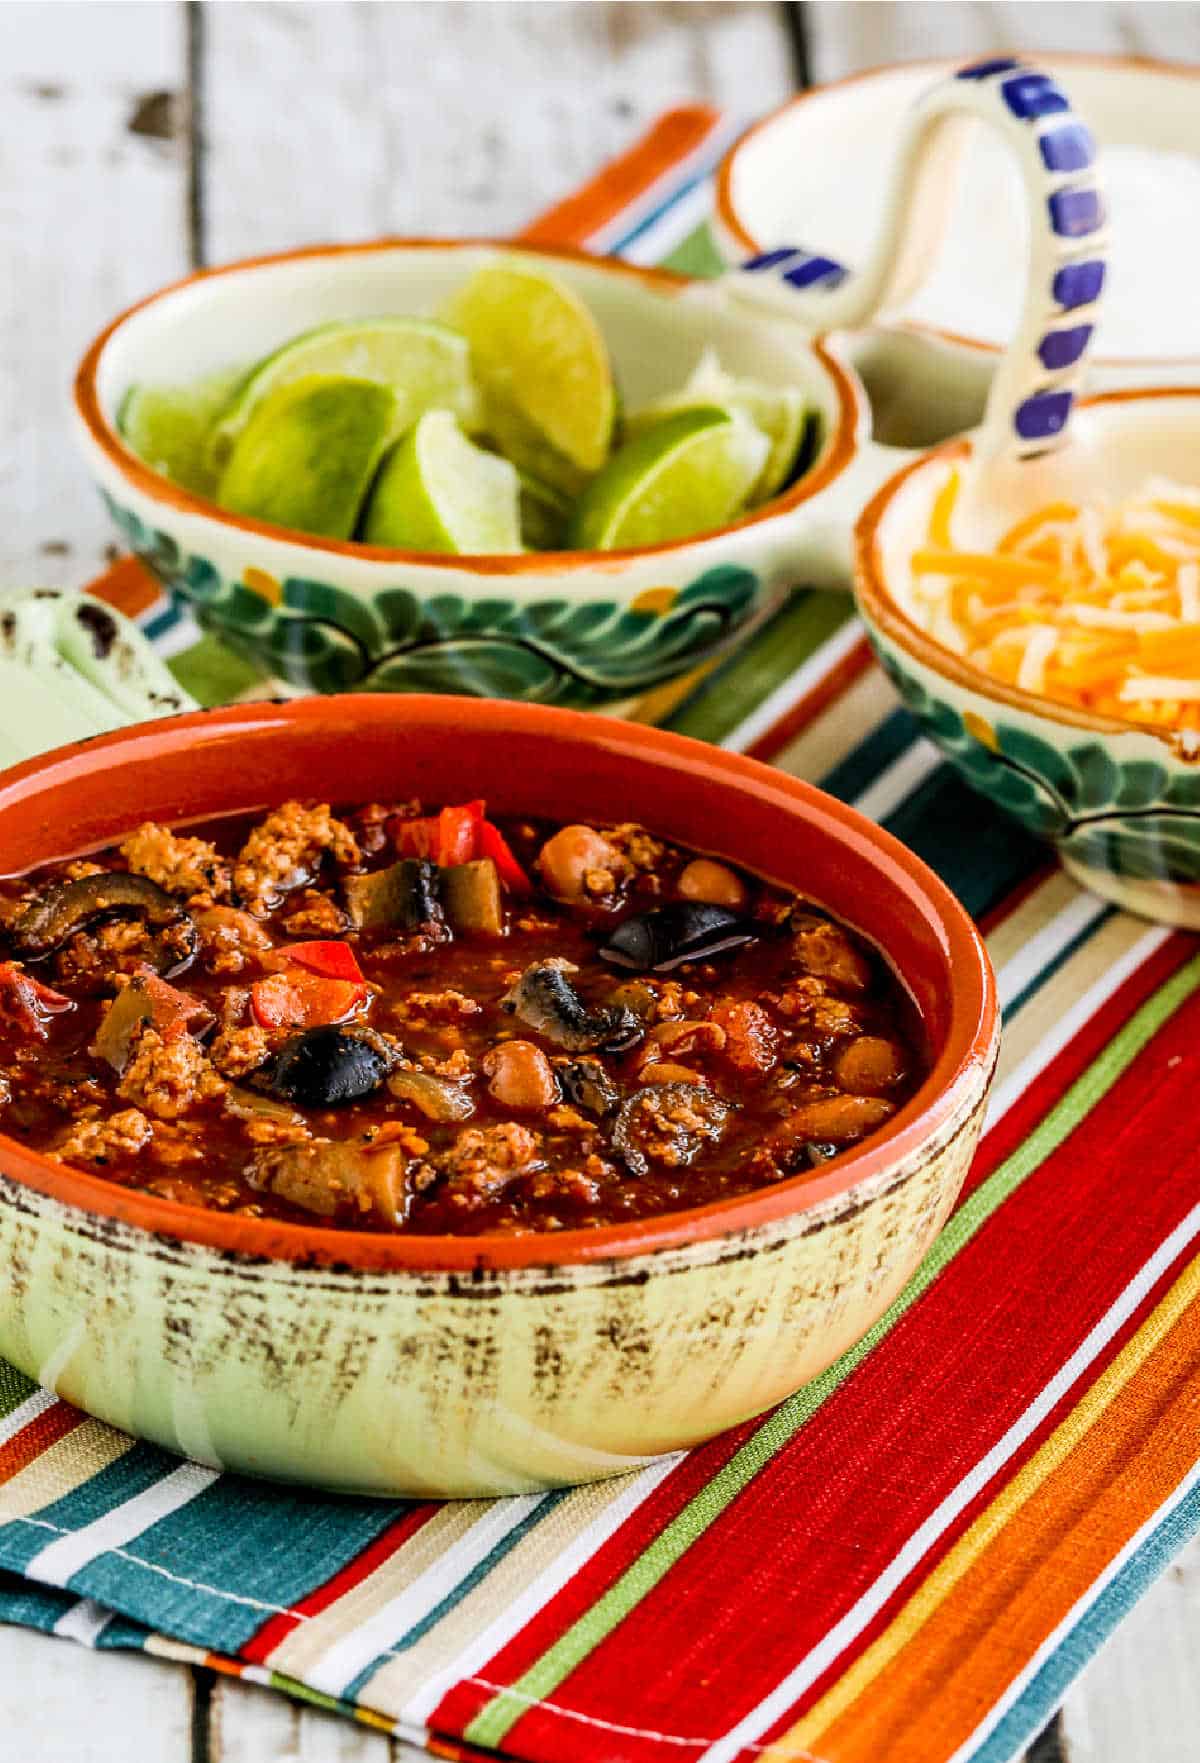 cropped image of Turkey Chili with Peppers, Mushrooms, and Olives